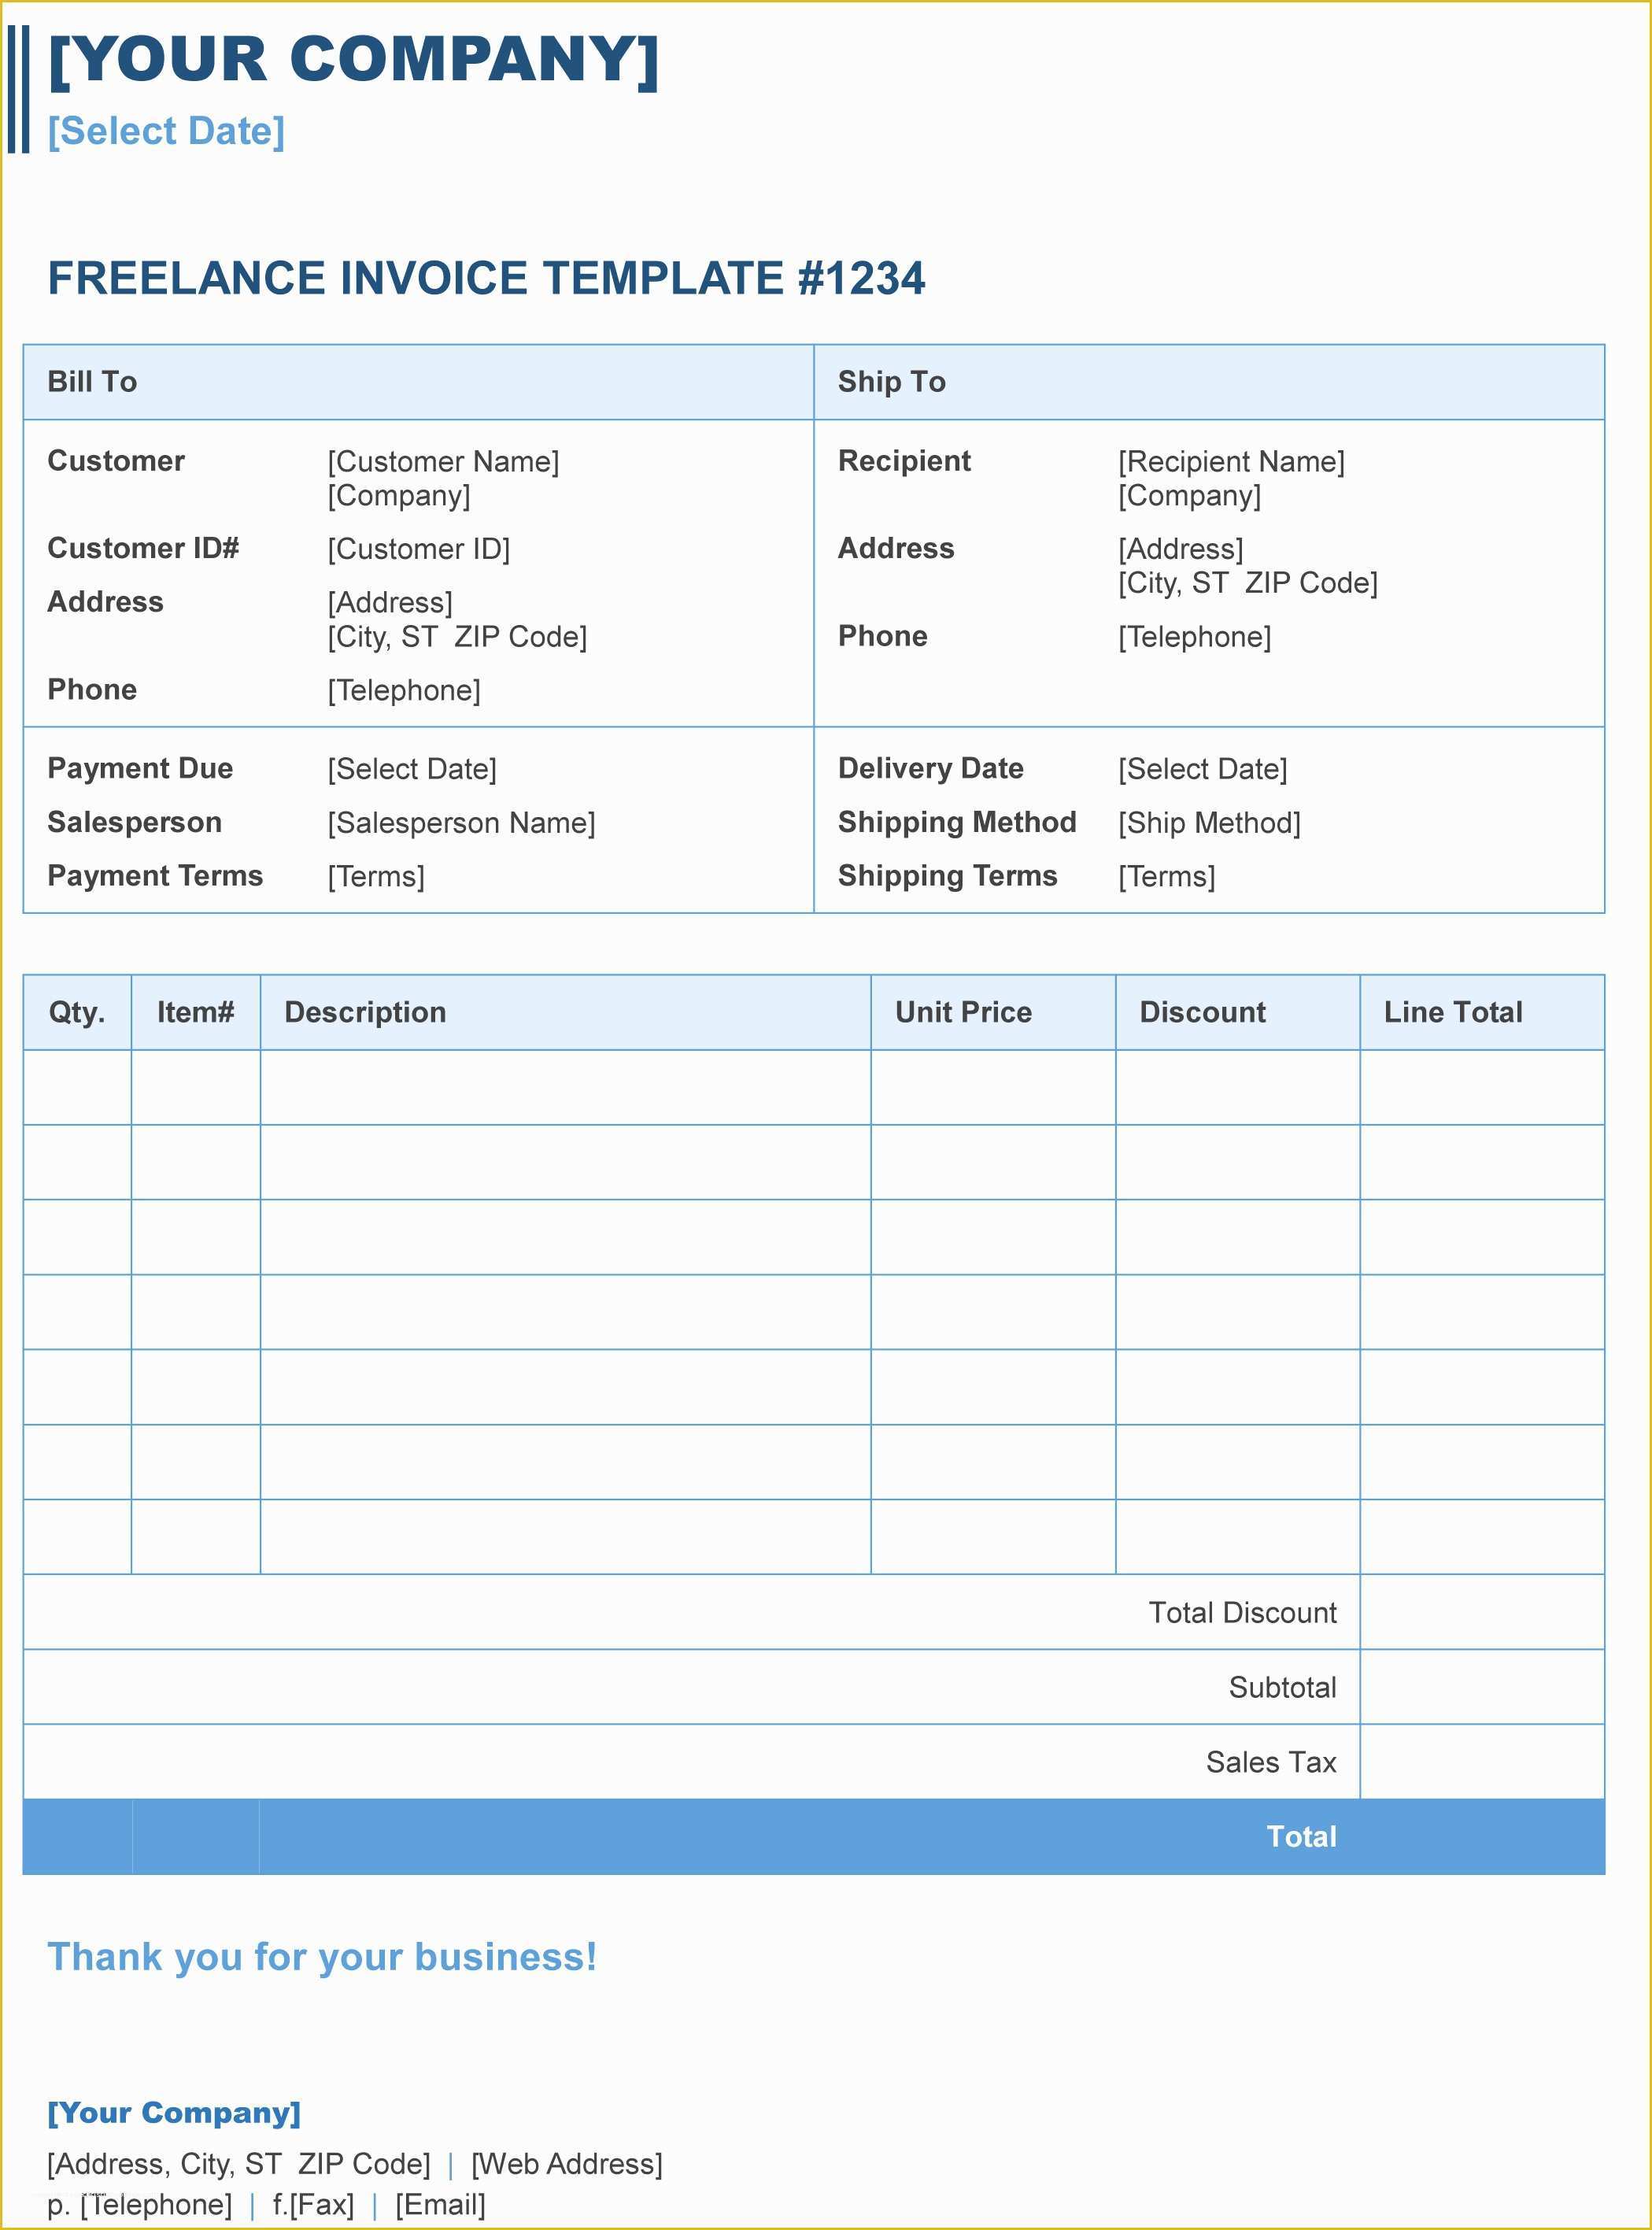 Microsoft Word Invoice Template Free Of Microsoft Word Invoice Template